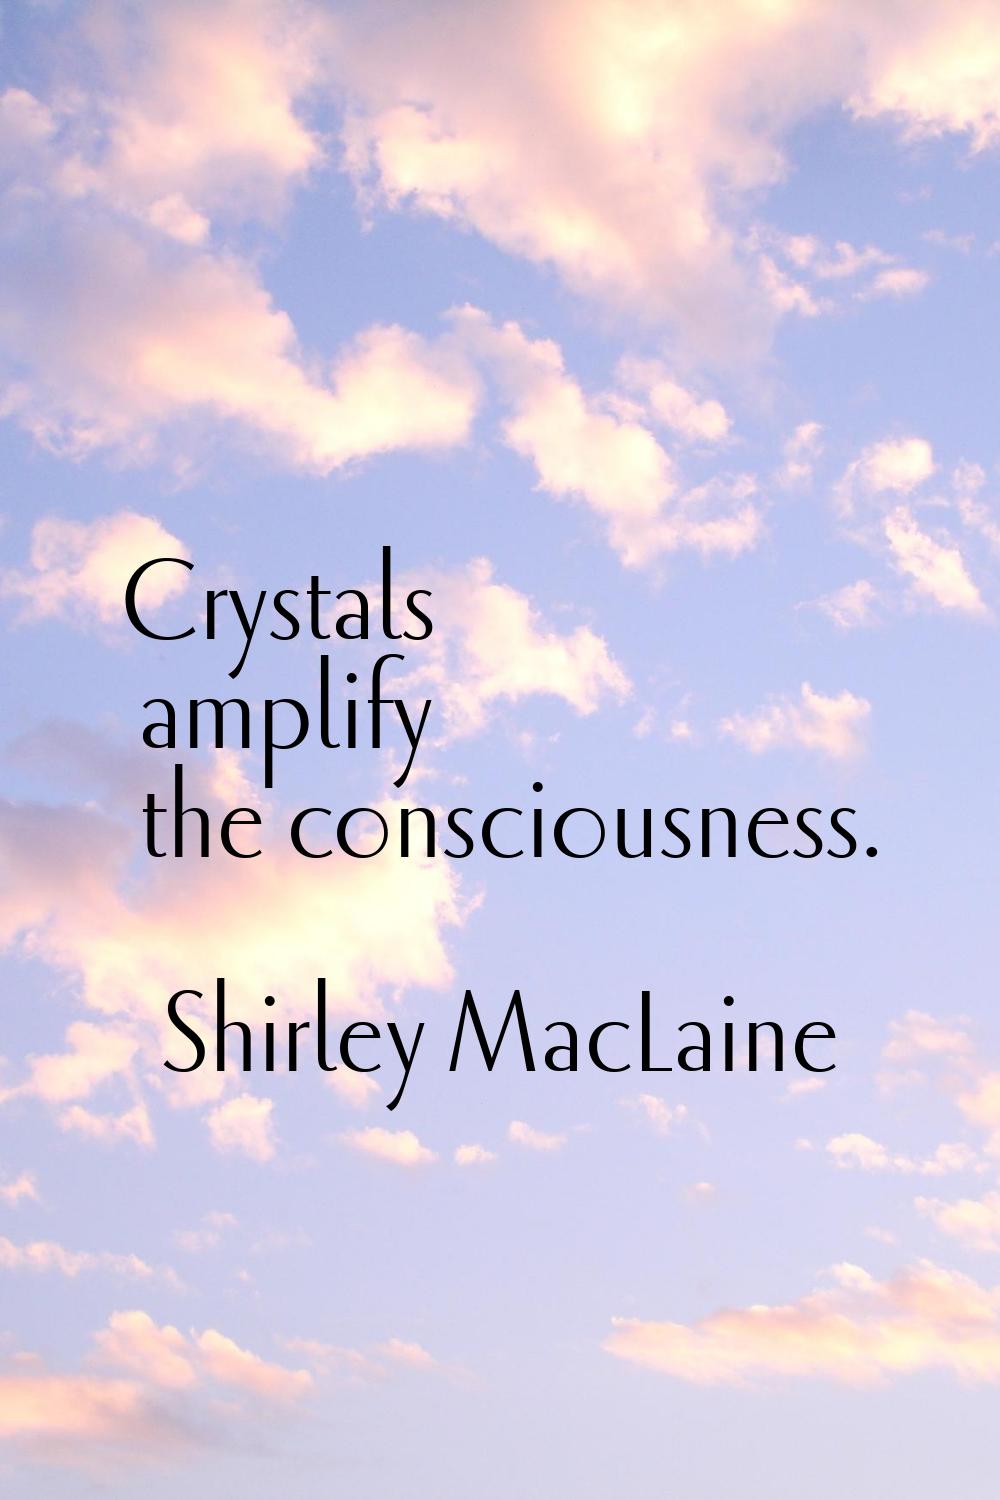 Crystals amplify the consciousness.